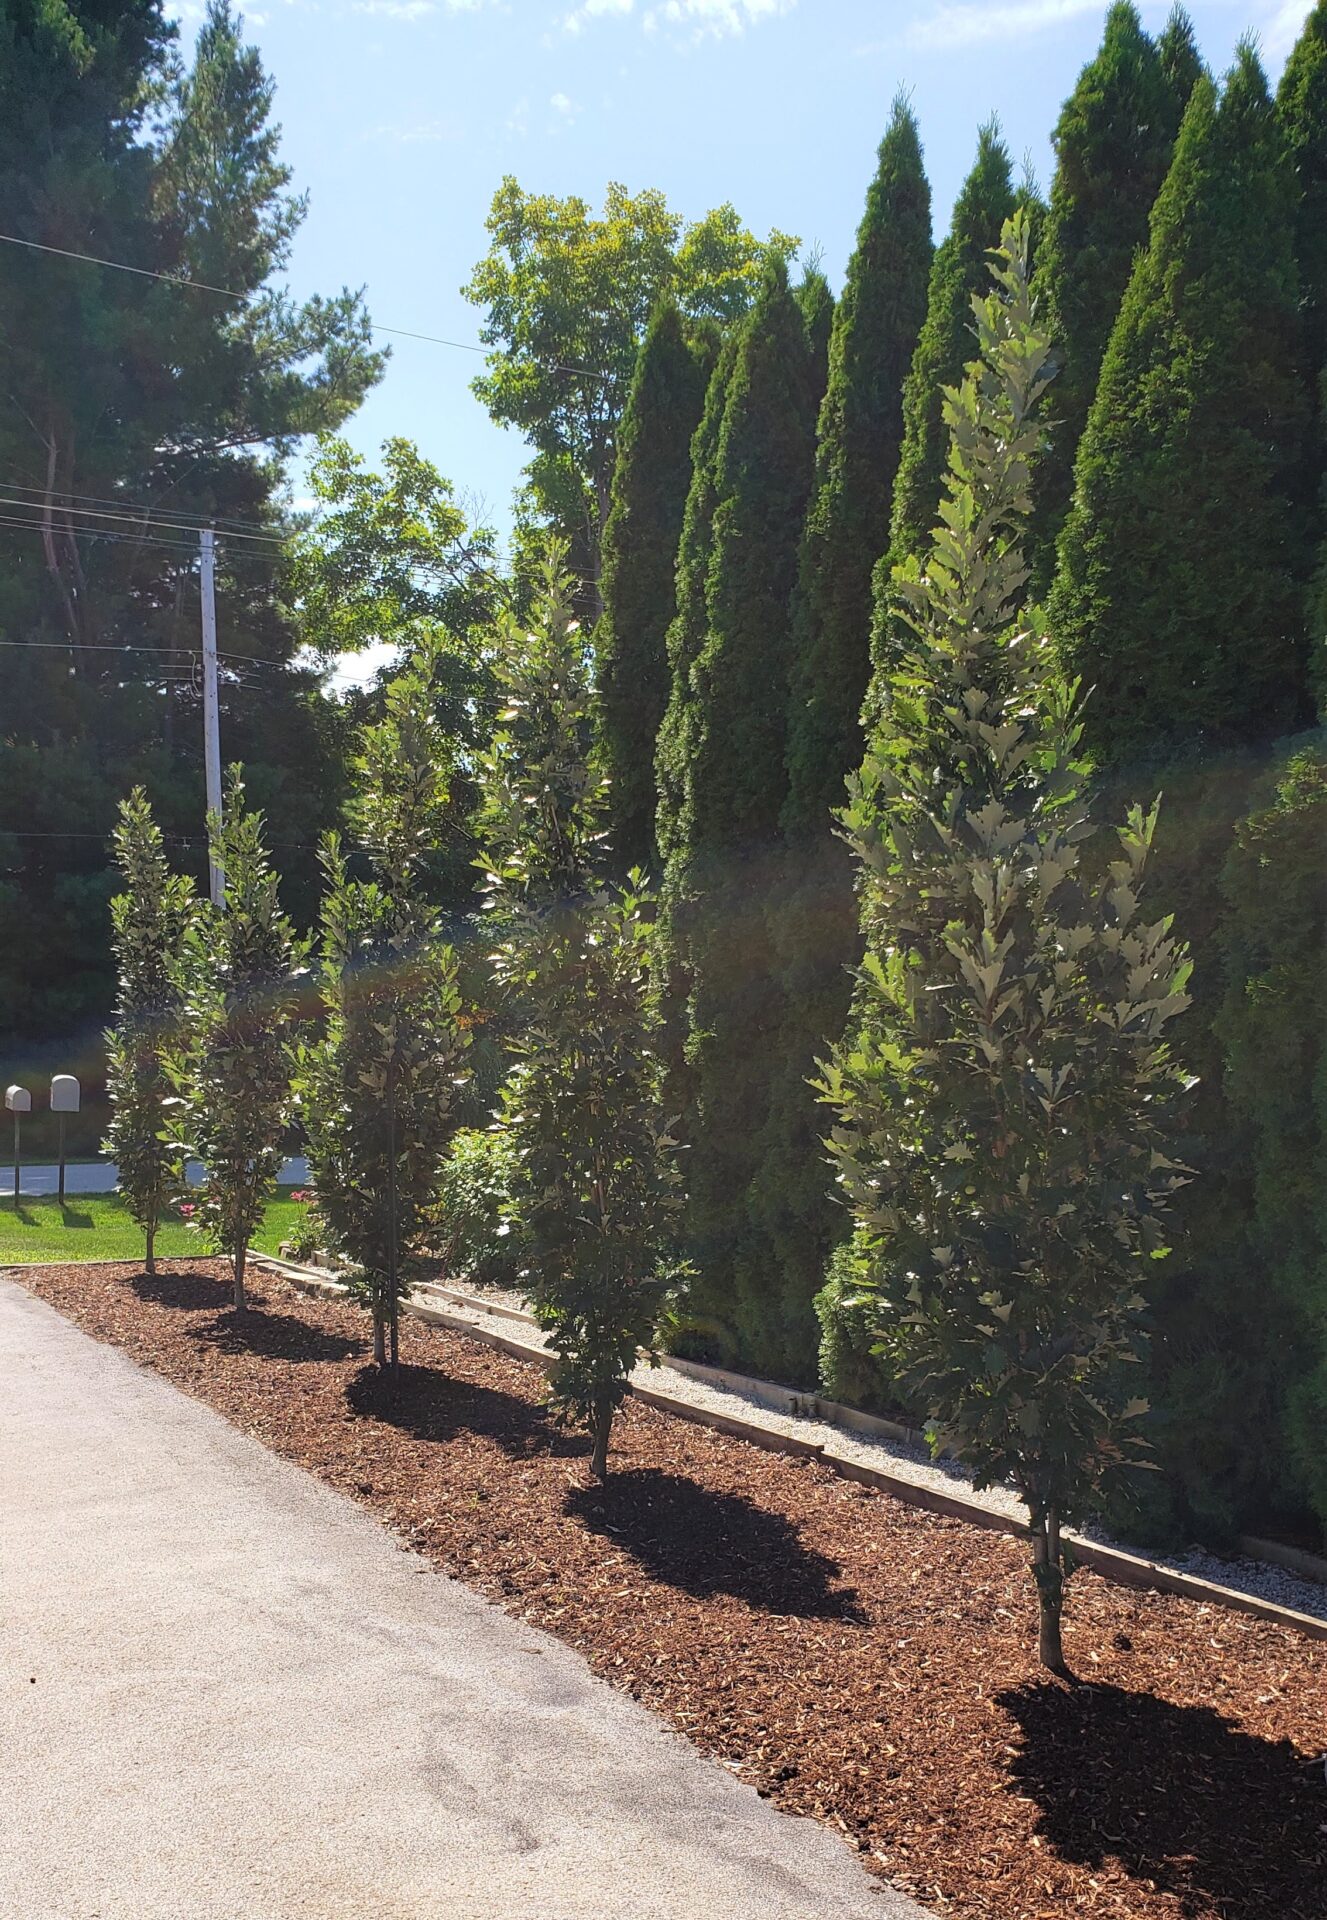 A row of young trees is planted along a path, with mature tall trees behind. The ground is covered in brown mulch, under a sunny sky.